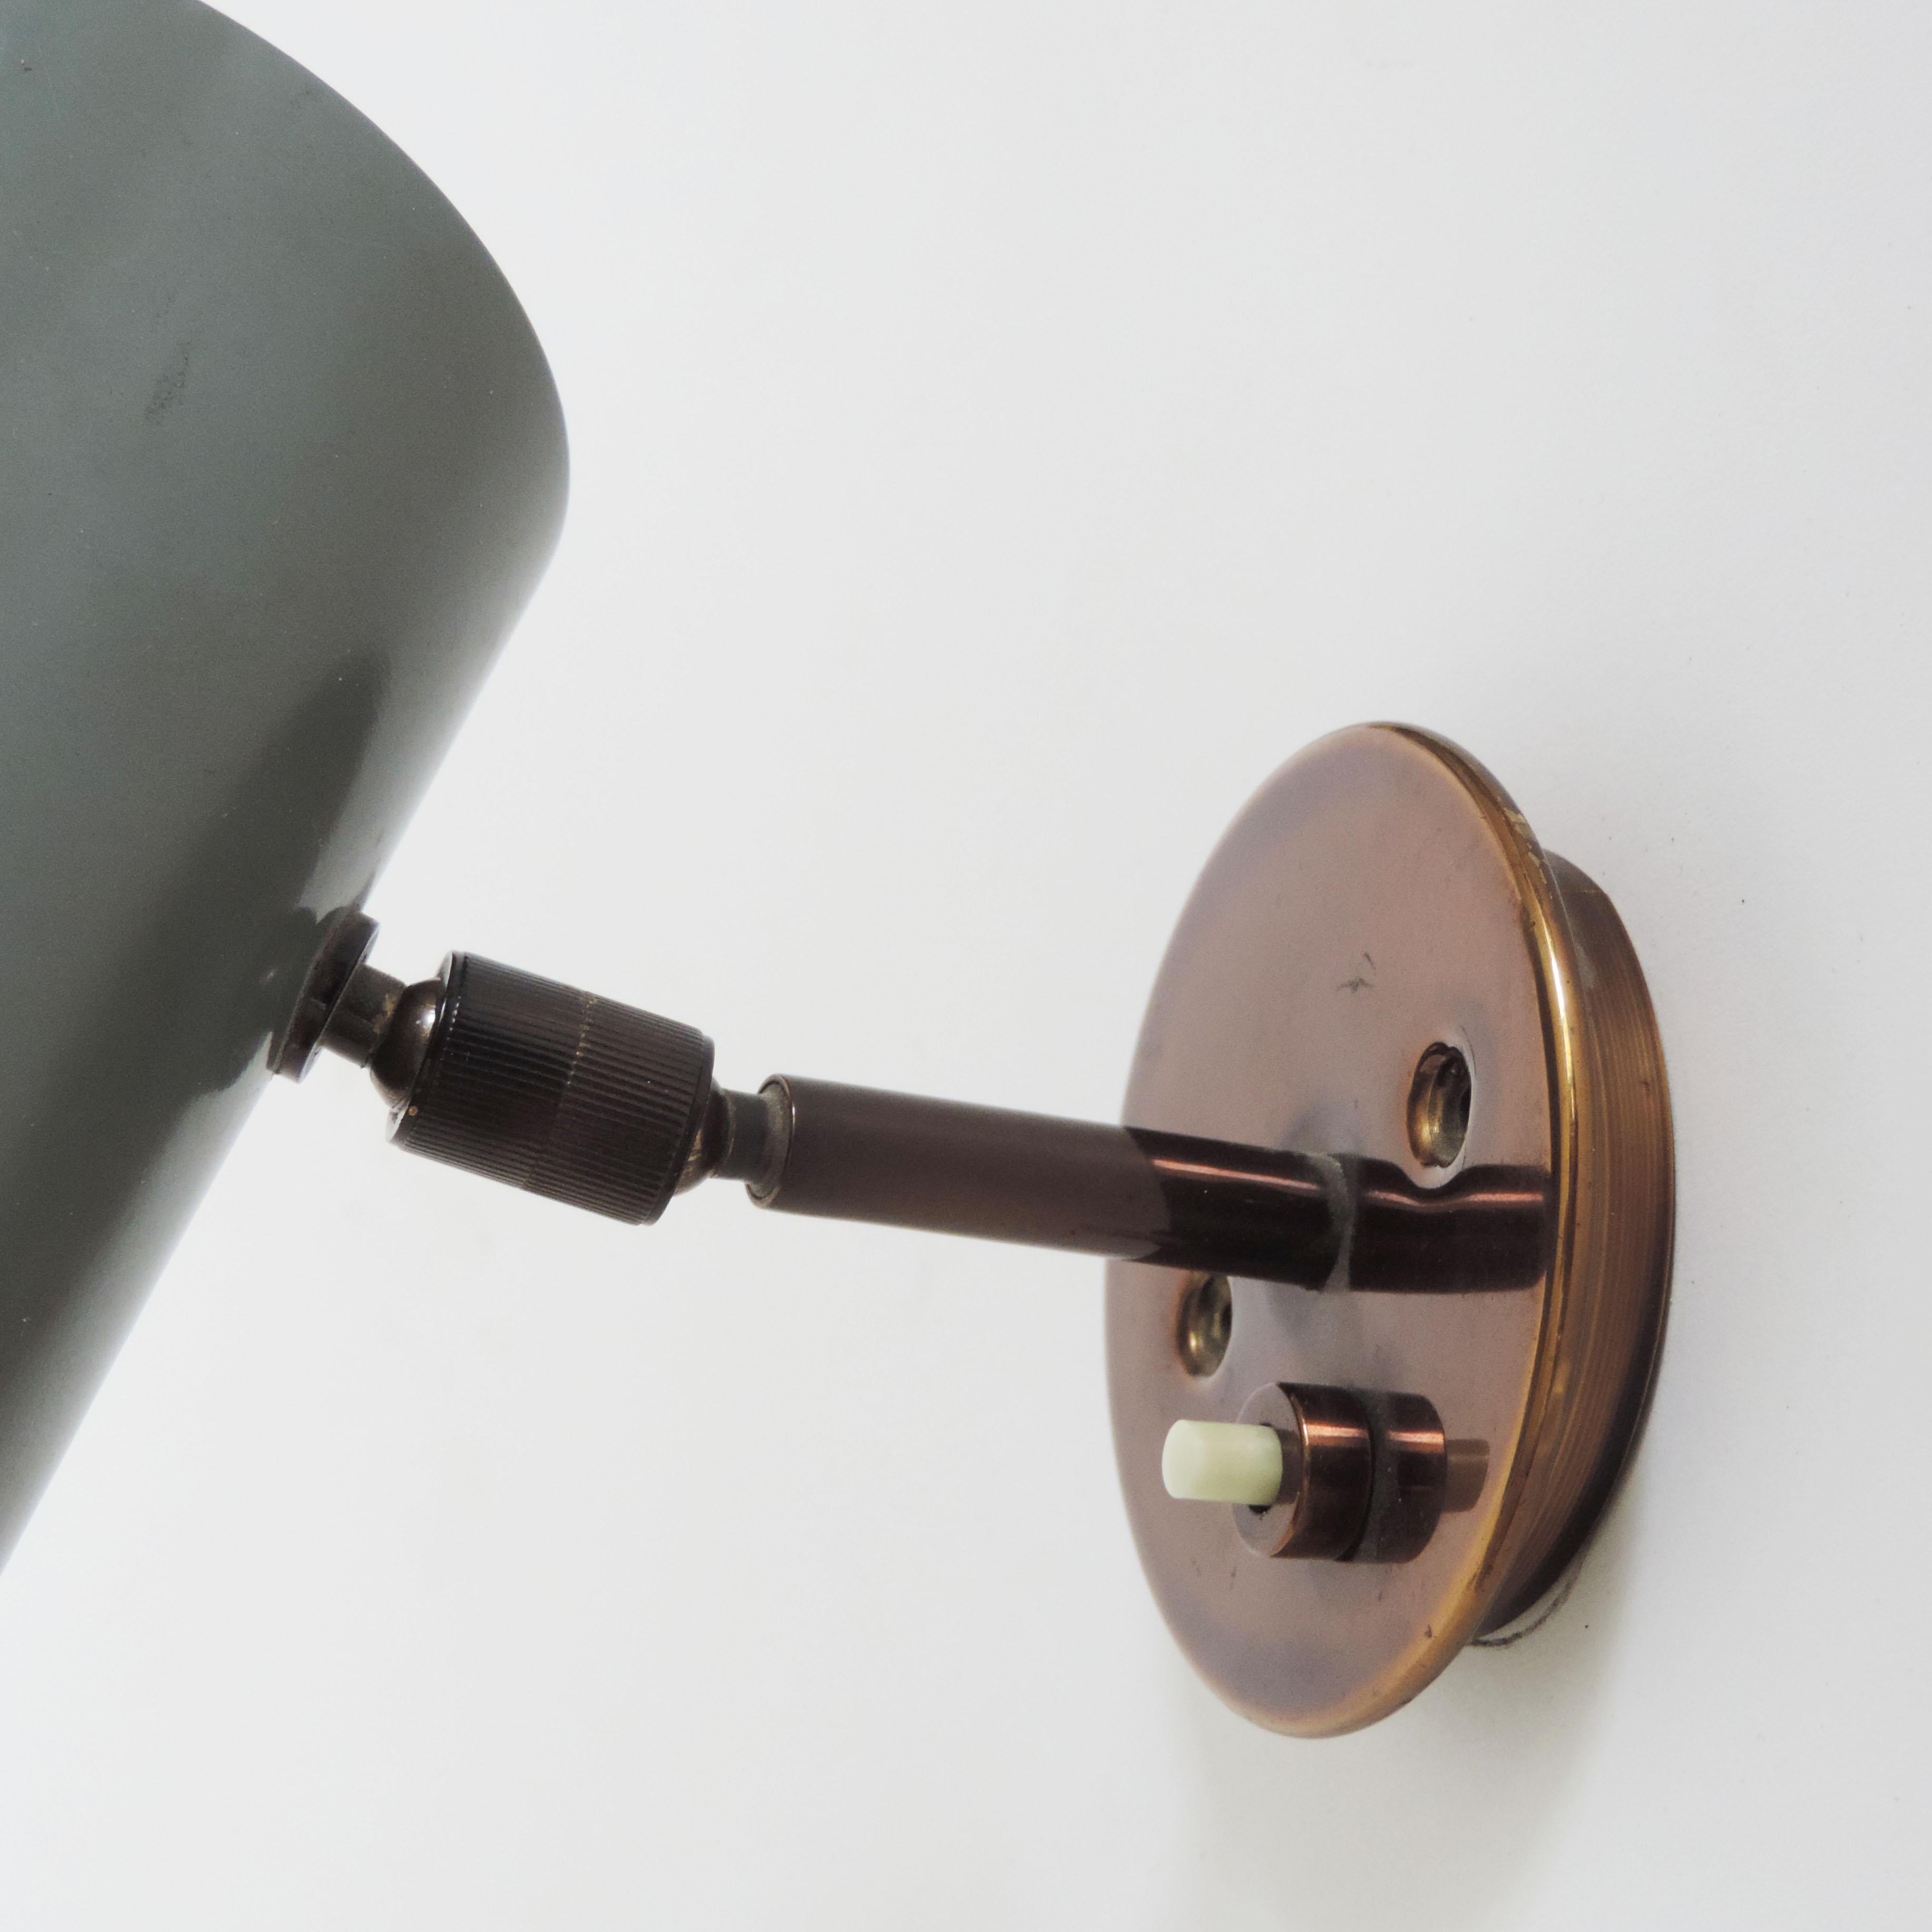 Gino Sarfatti Mod. 34 variant grey and burnished brass adjustable wall lamp for Arteluce, 
Italy, 1954.